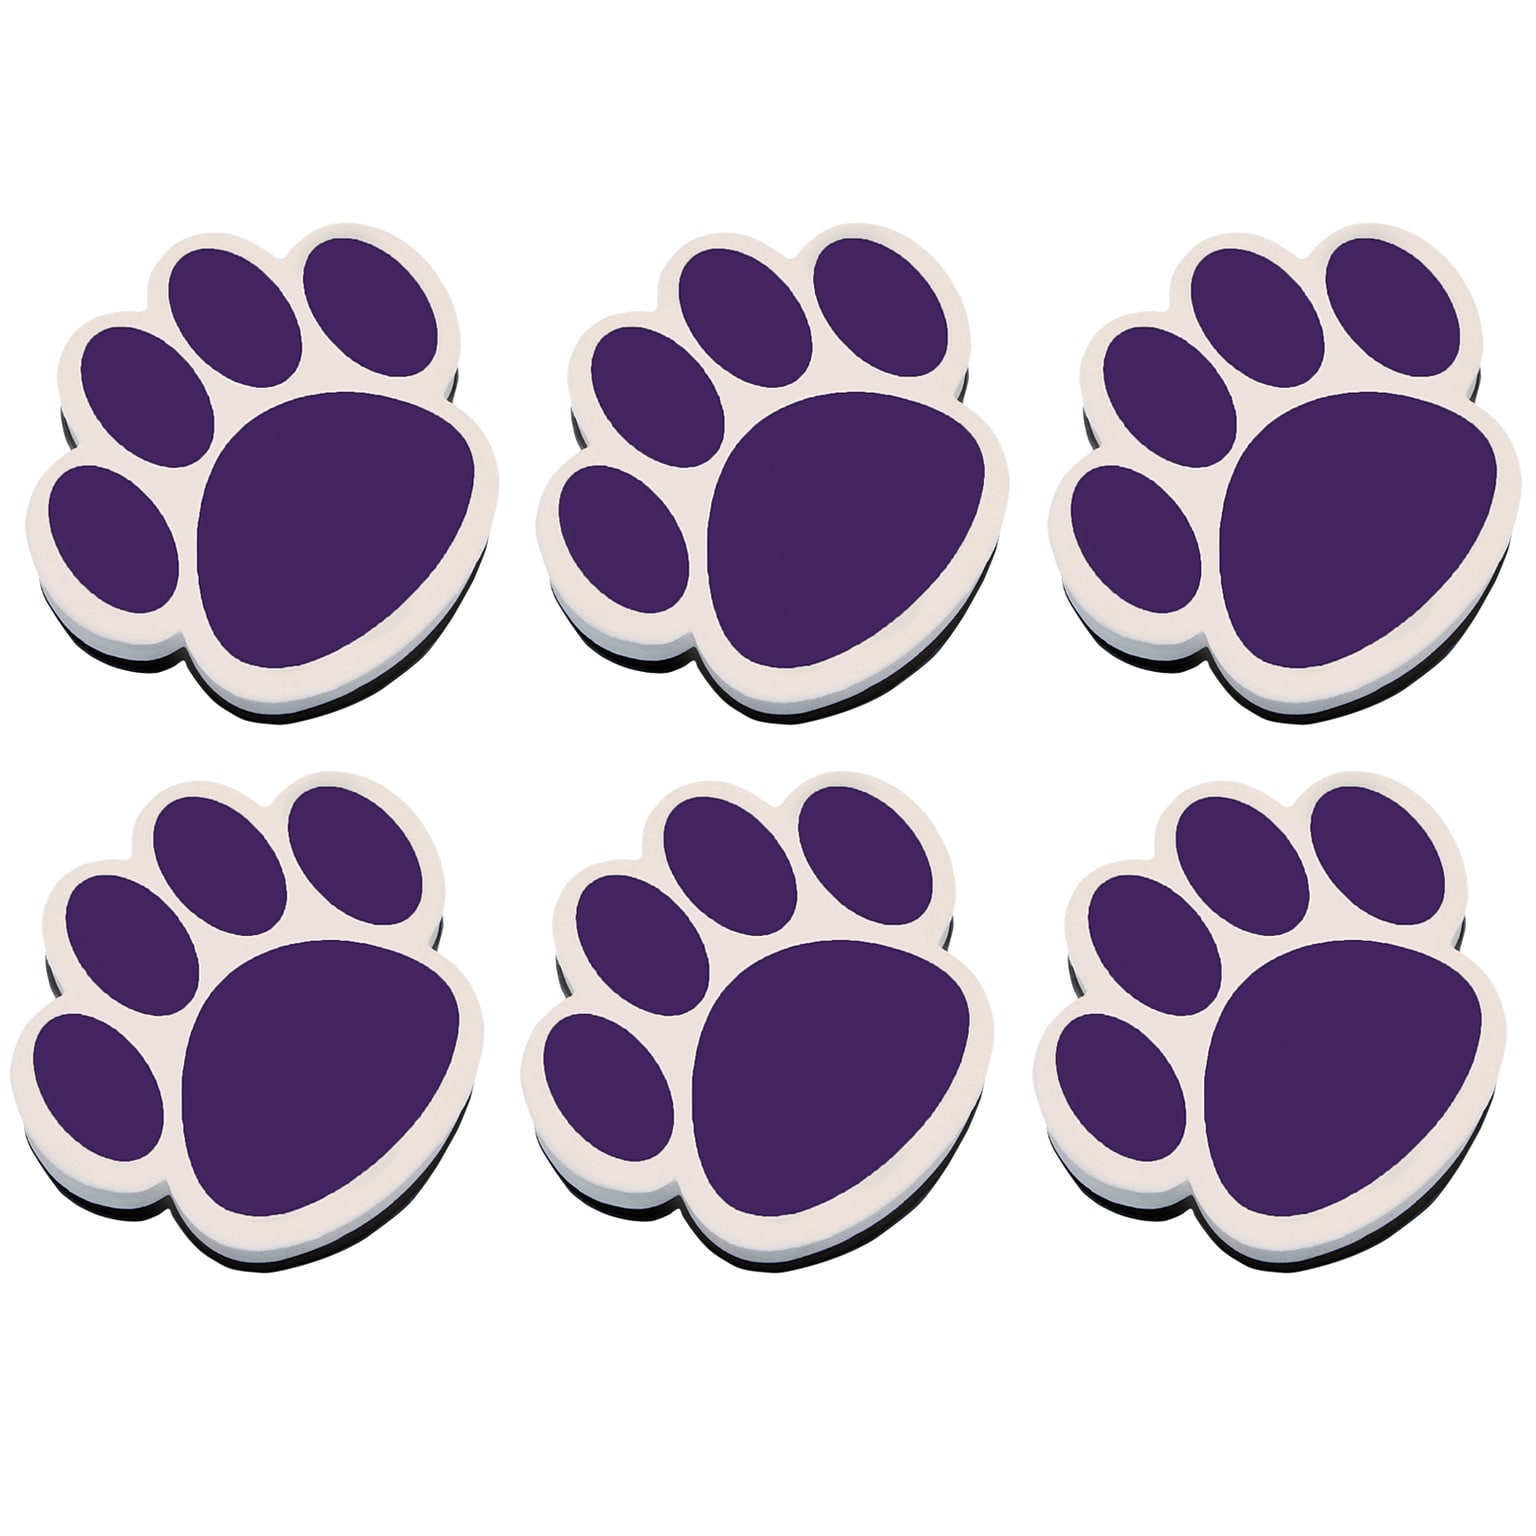 Ashley Productions® Dry Erase Magnetic Whiteboard Erasers, Purple Paw, Pack of 6 (ASH10005-6)